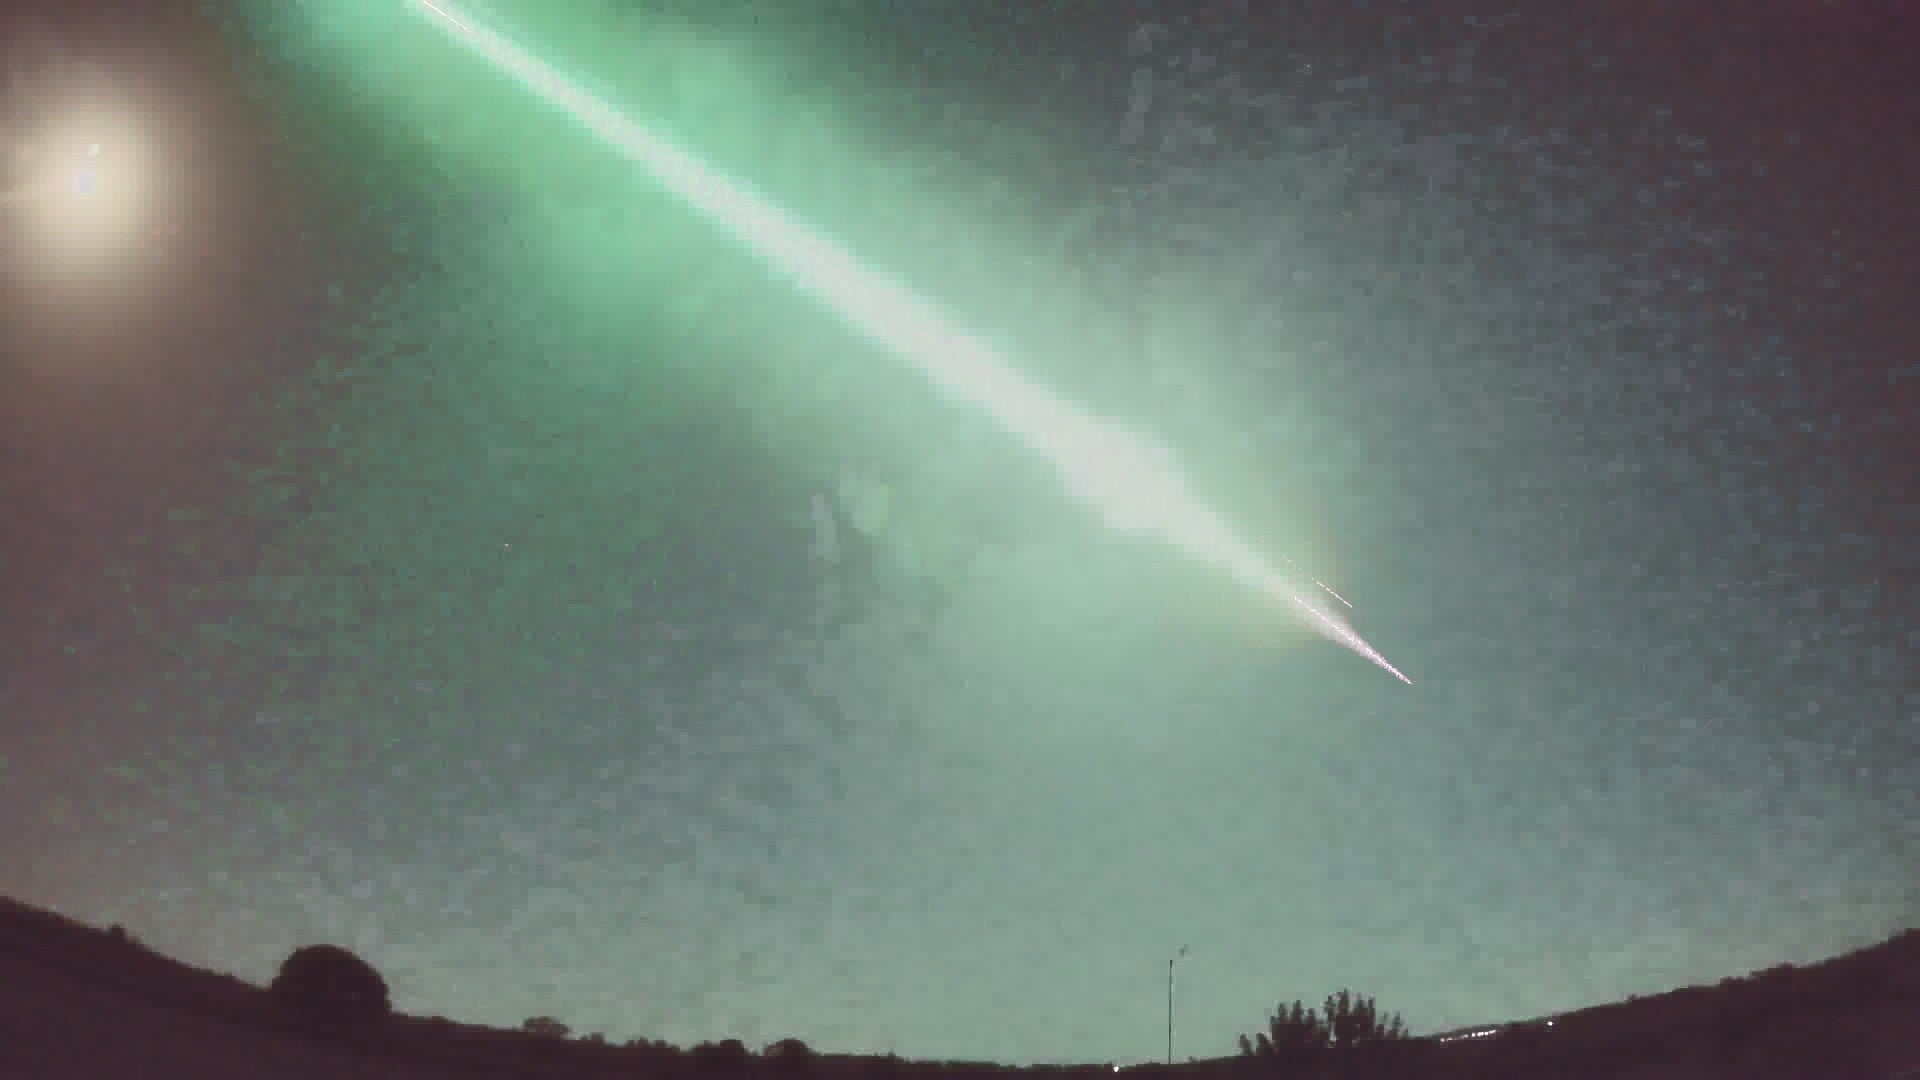 A view of the meteor as it speeds over Sturminster, Dorset